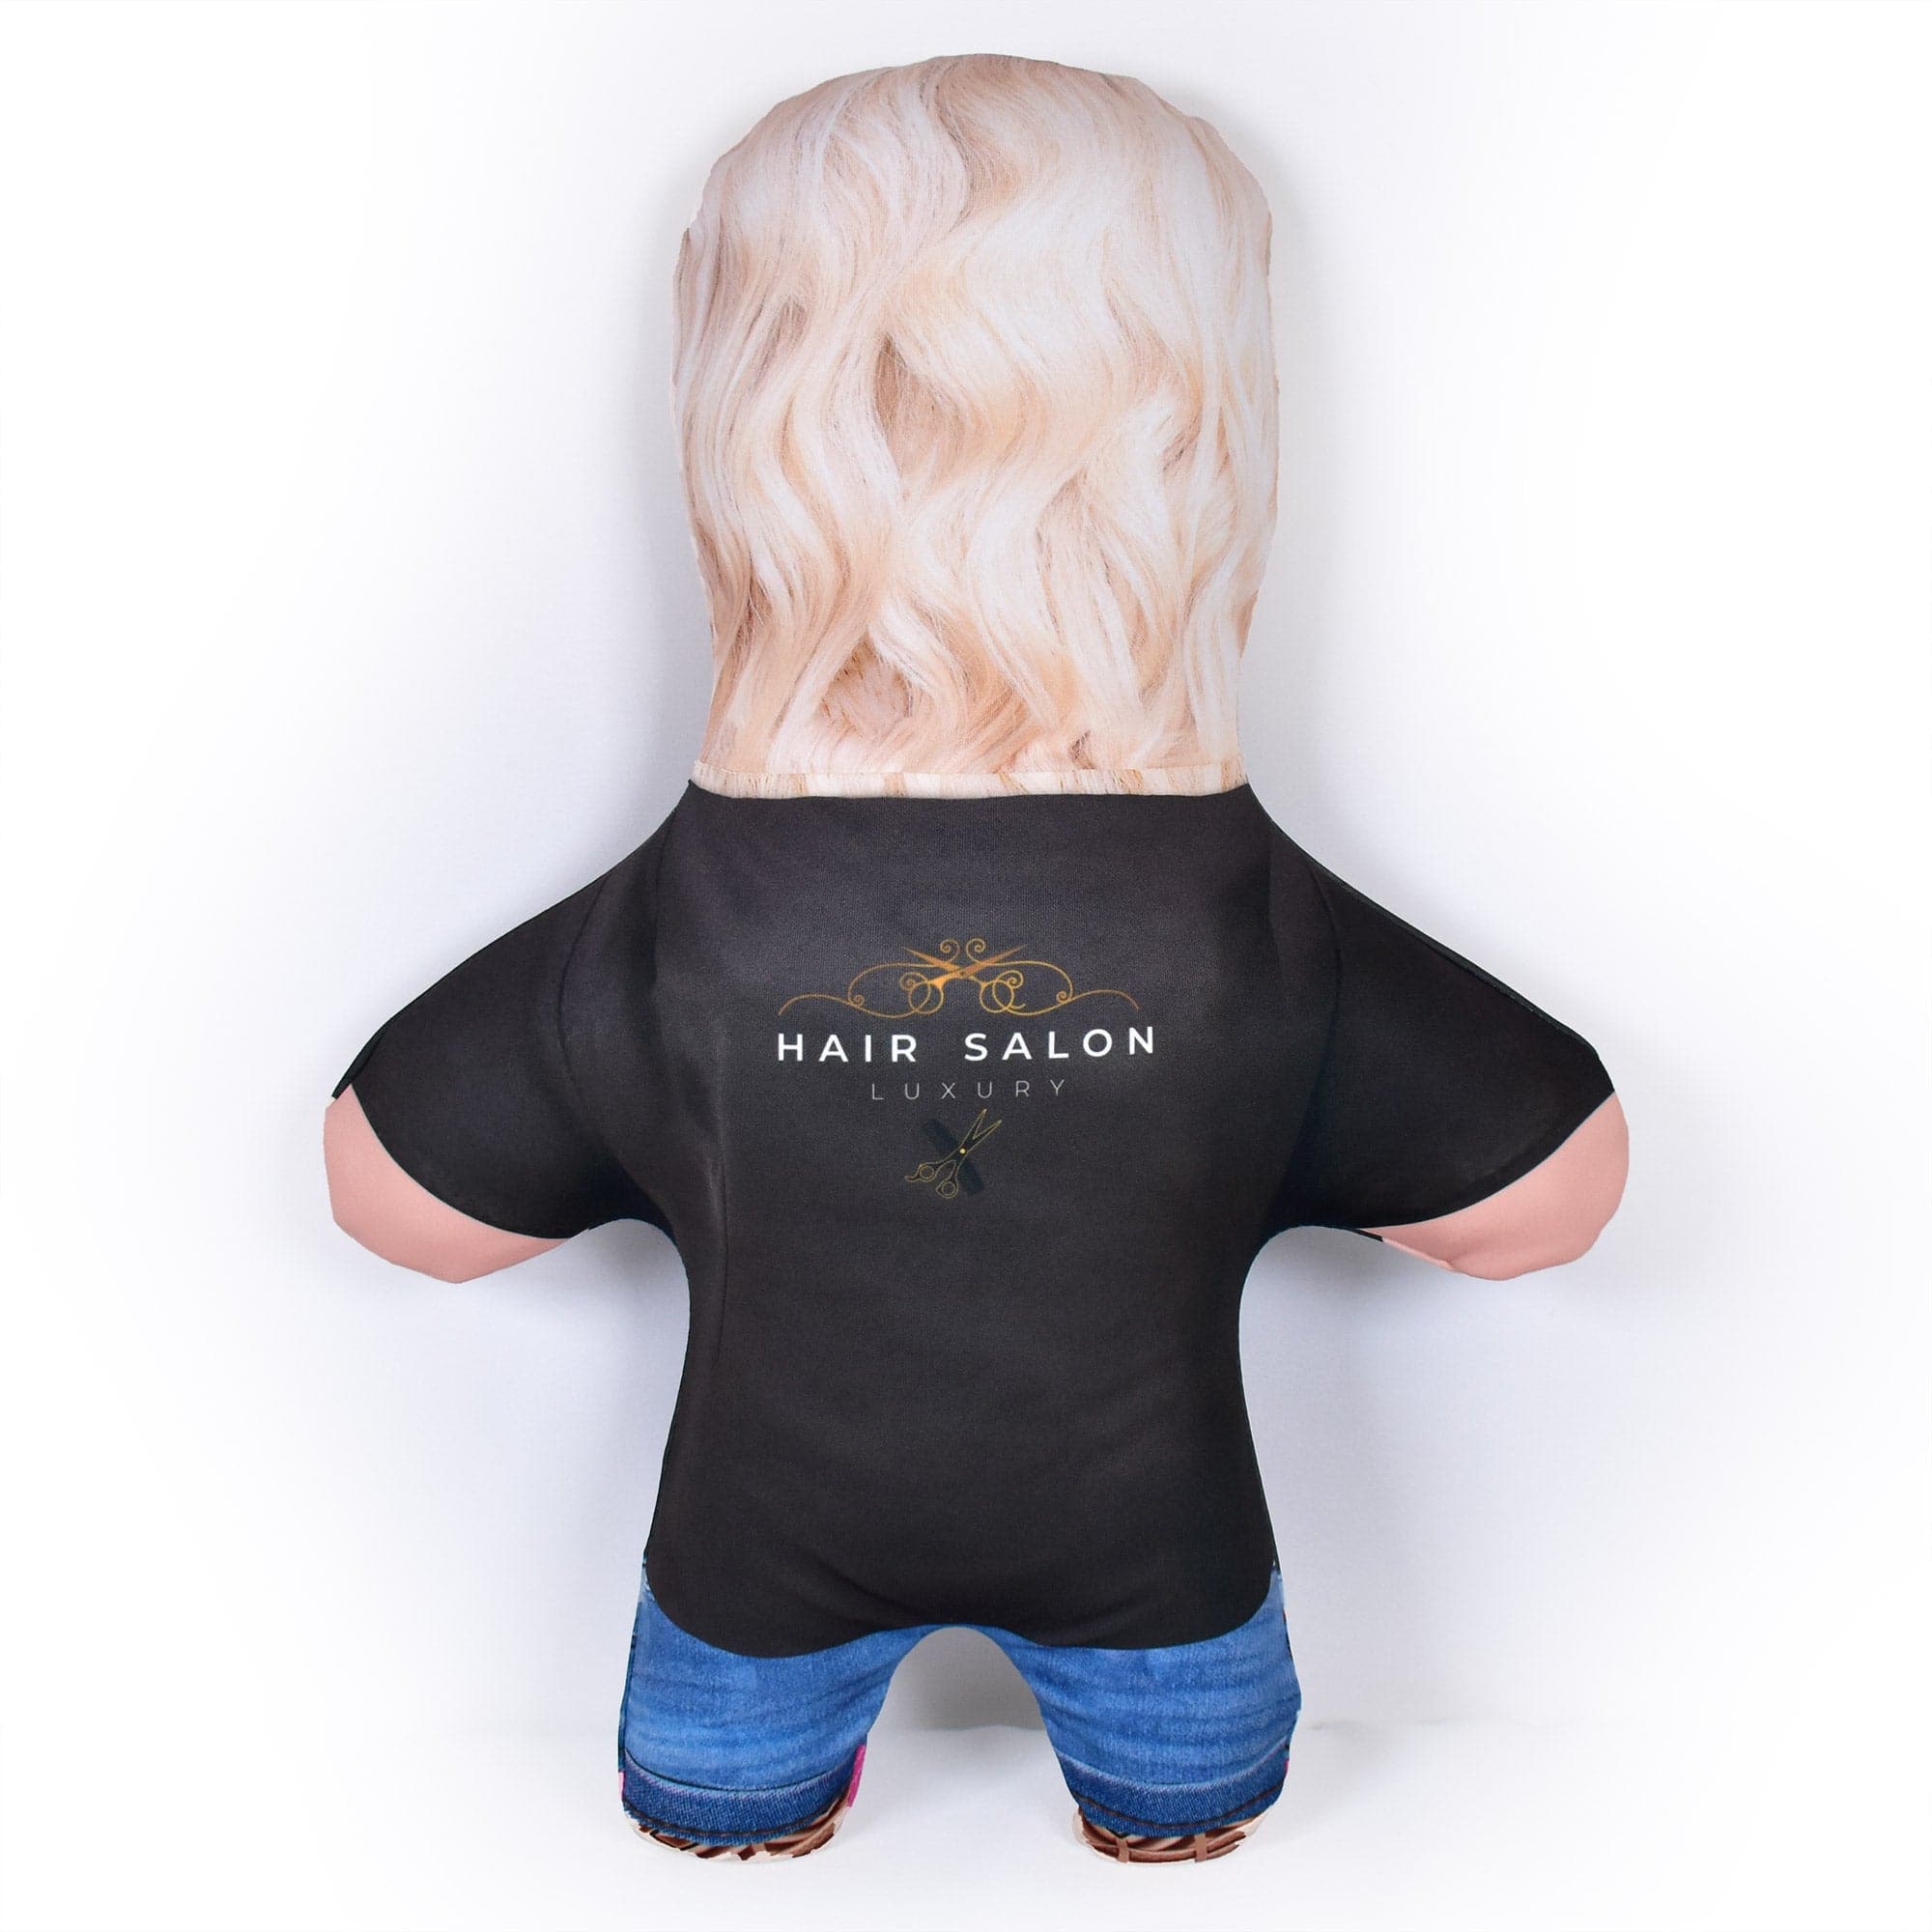 Hairdresser - 5 Styles - Personalised Mini Me Doll